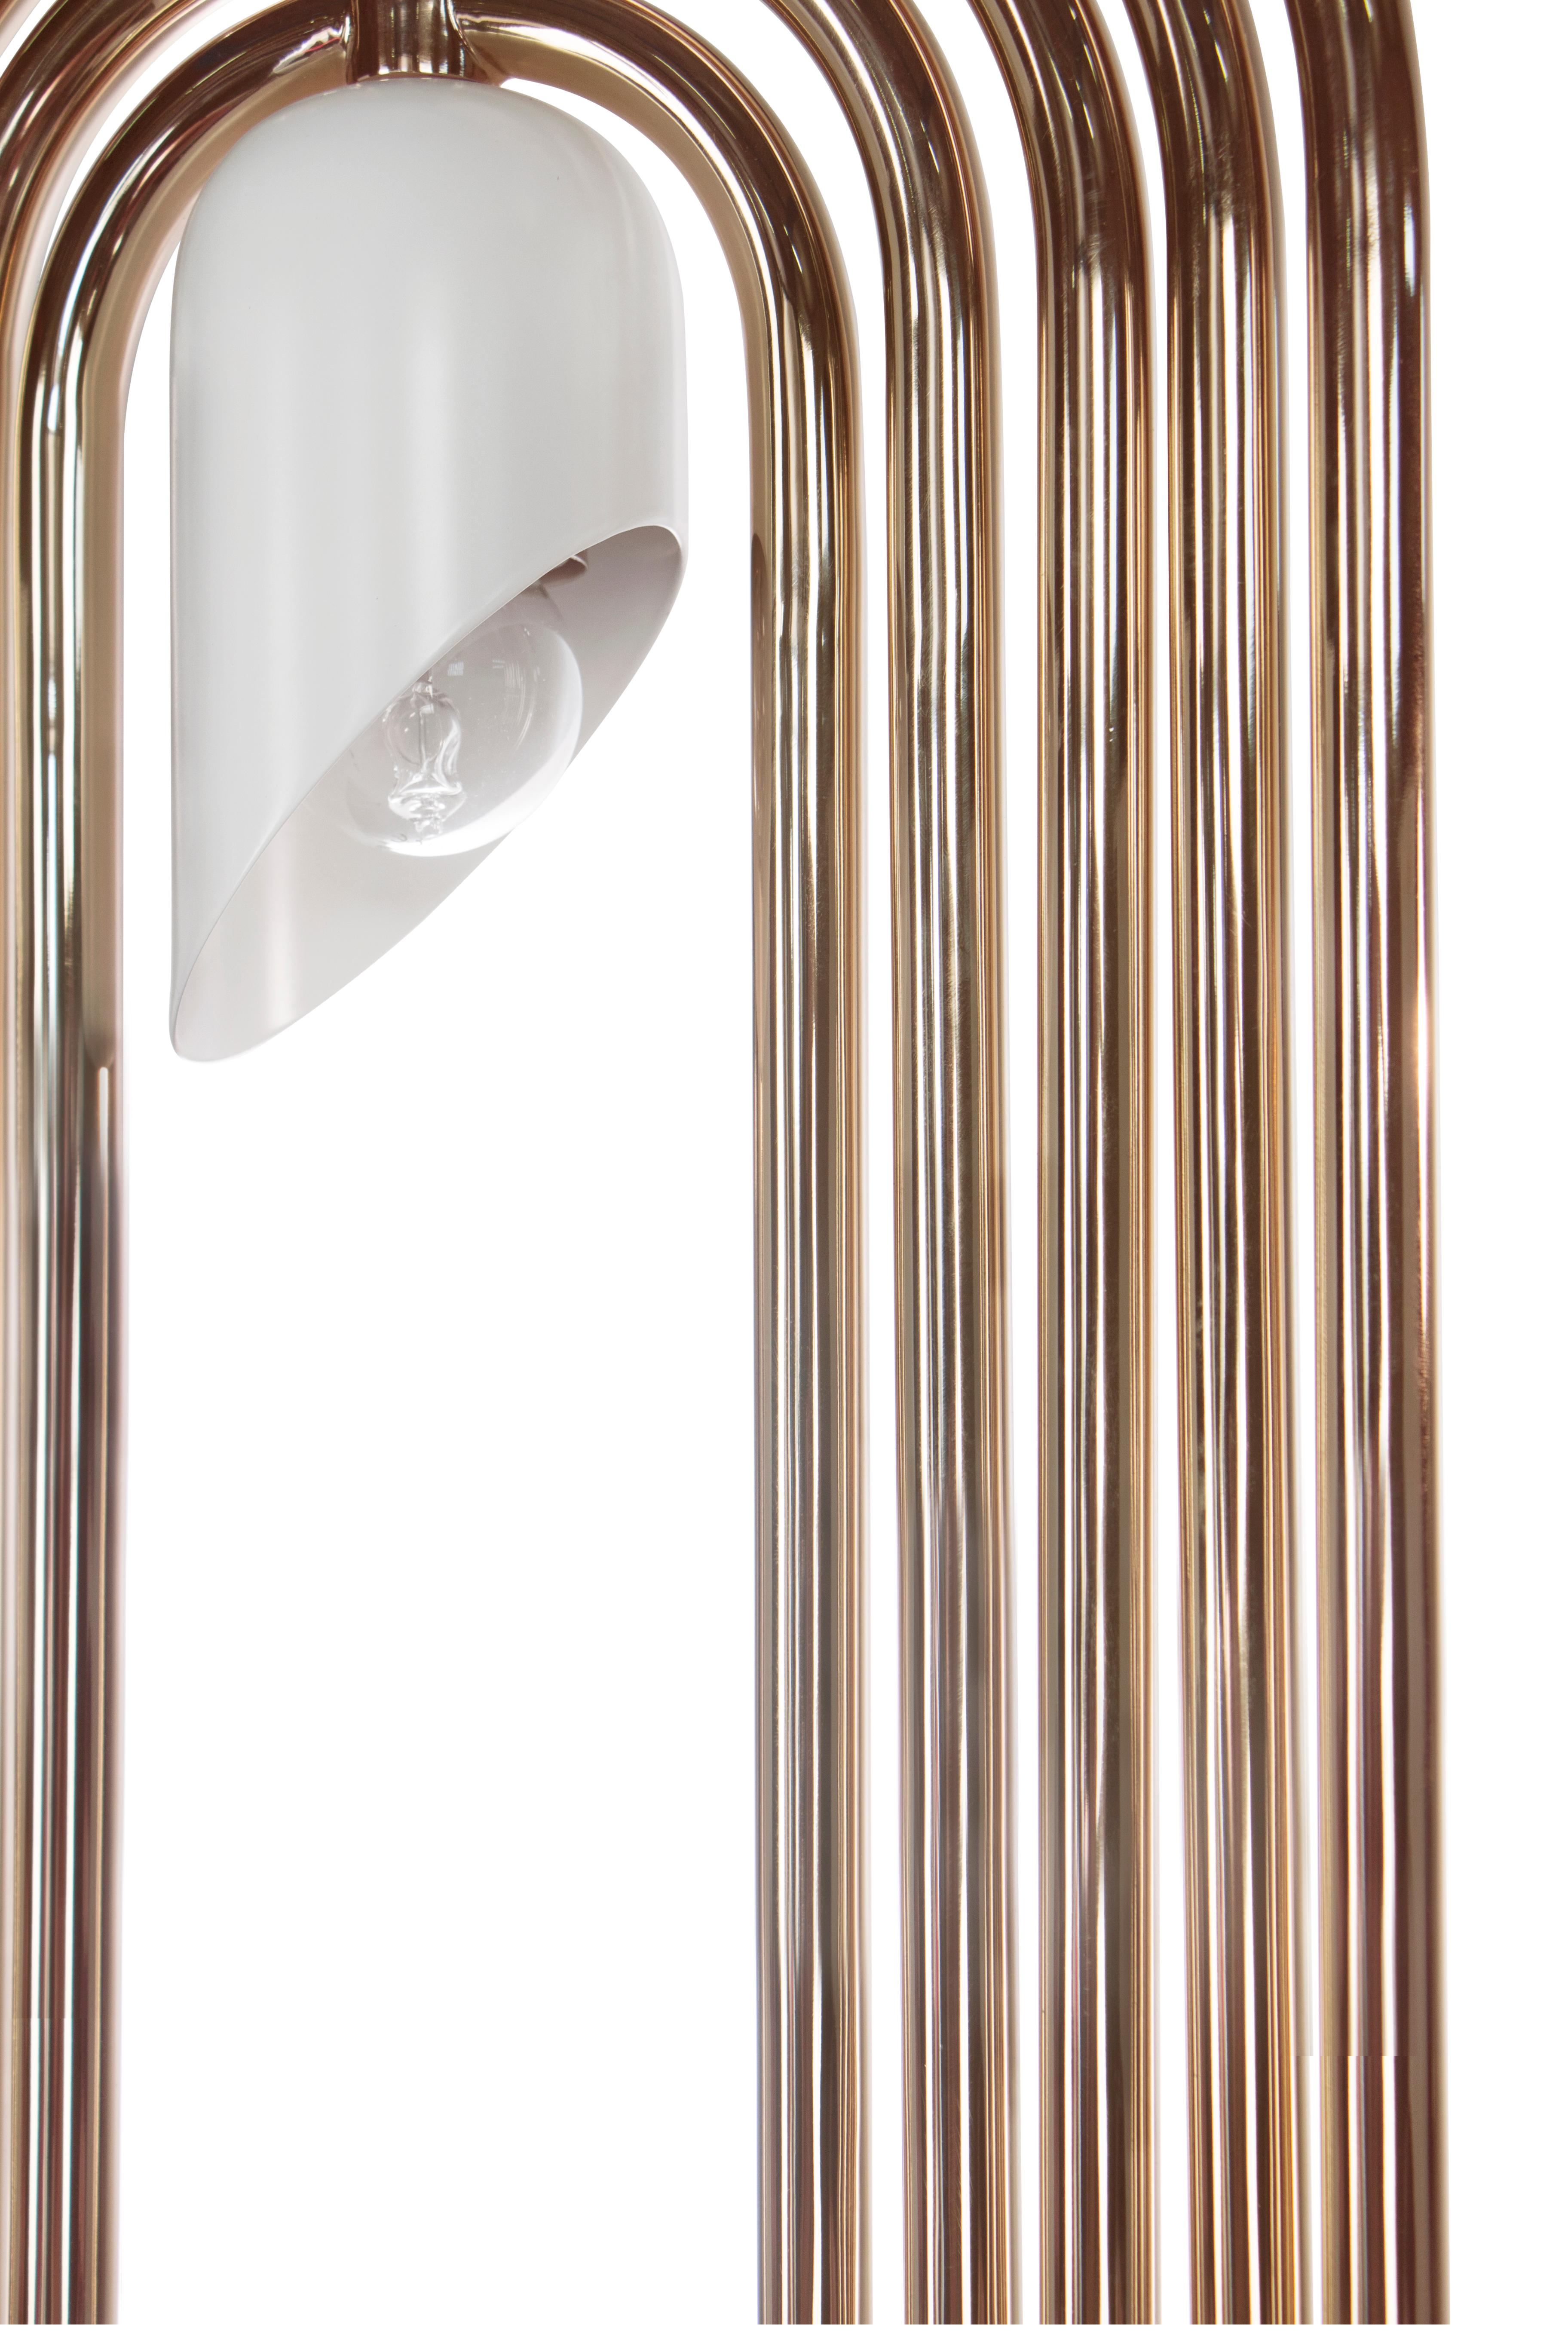 Inspired by the astonishing and memorable dance moves of the iconic pop singer, Delightfull design team created the Turner family. Turner pendant lamp is an art deco lighting fixtures handmade in brass and aluminum that boasts all the most special